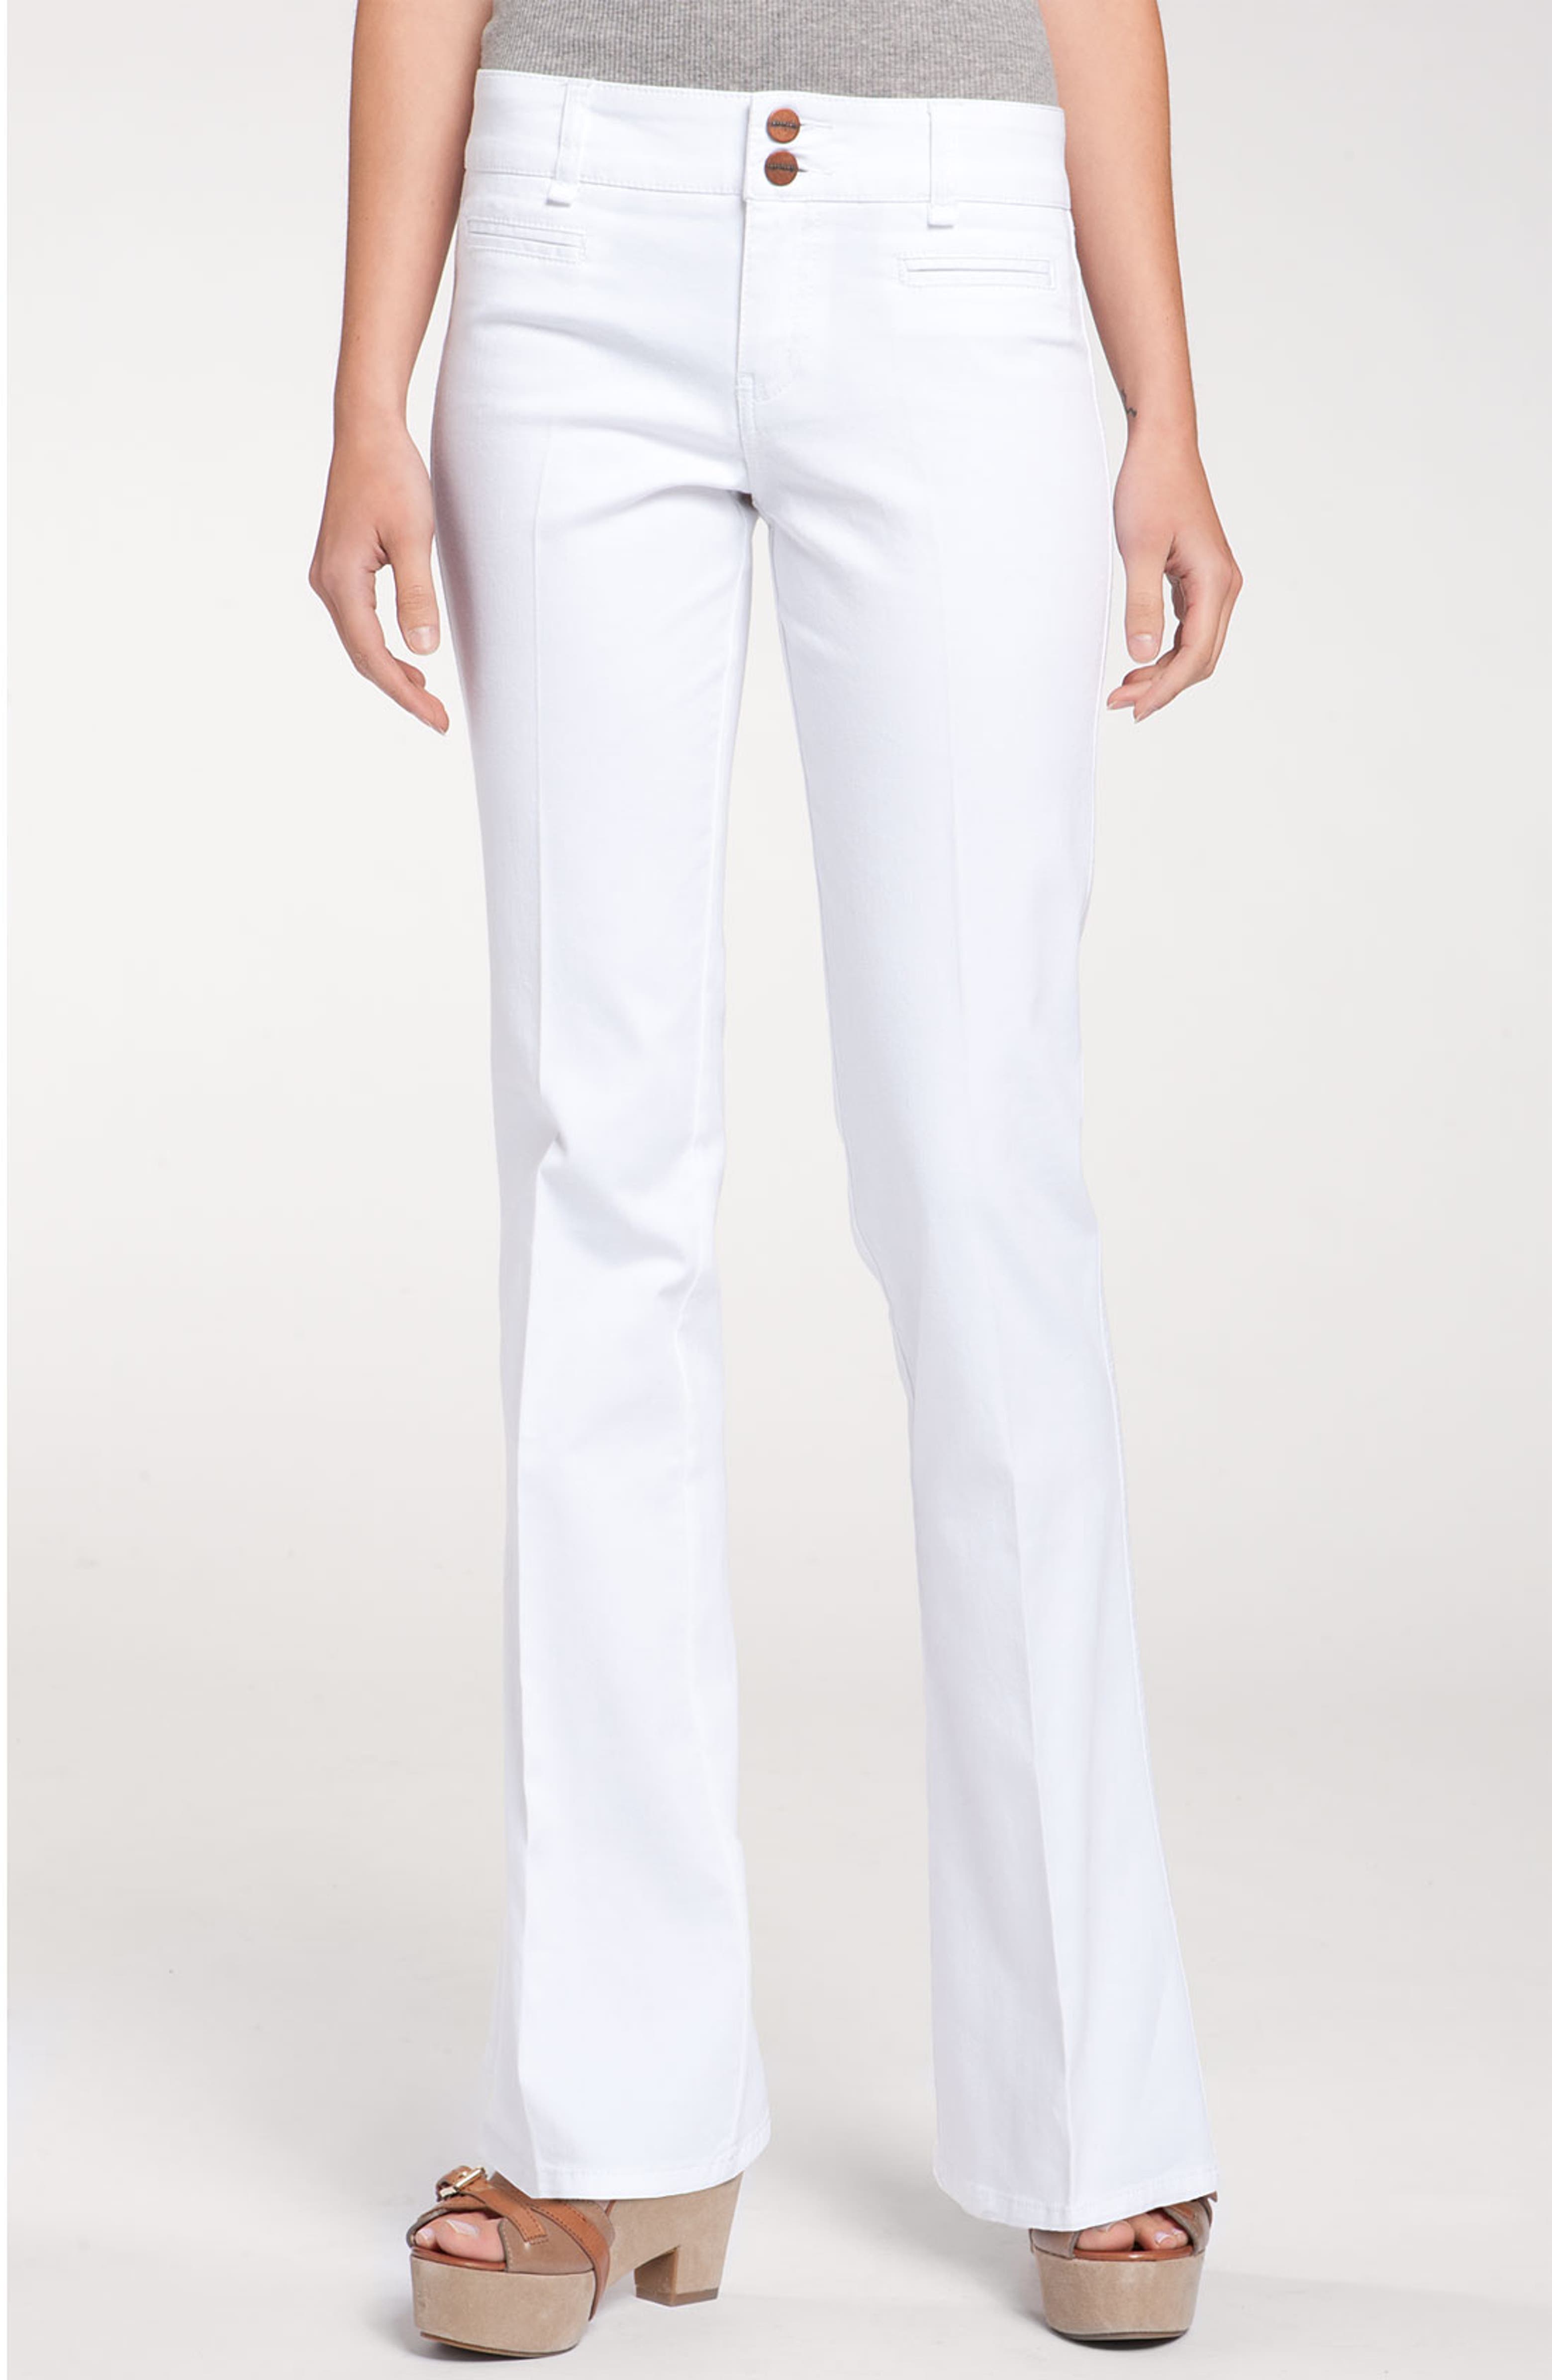 Sanctuary 'New Angie' Bootcut Pants | Nordstrom